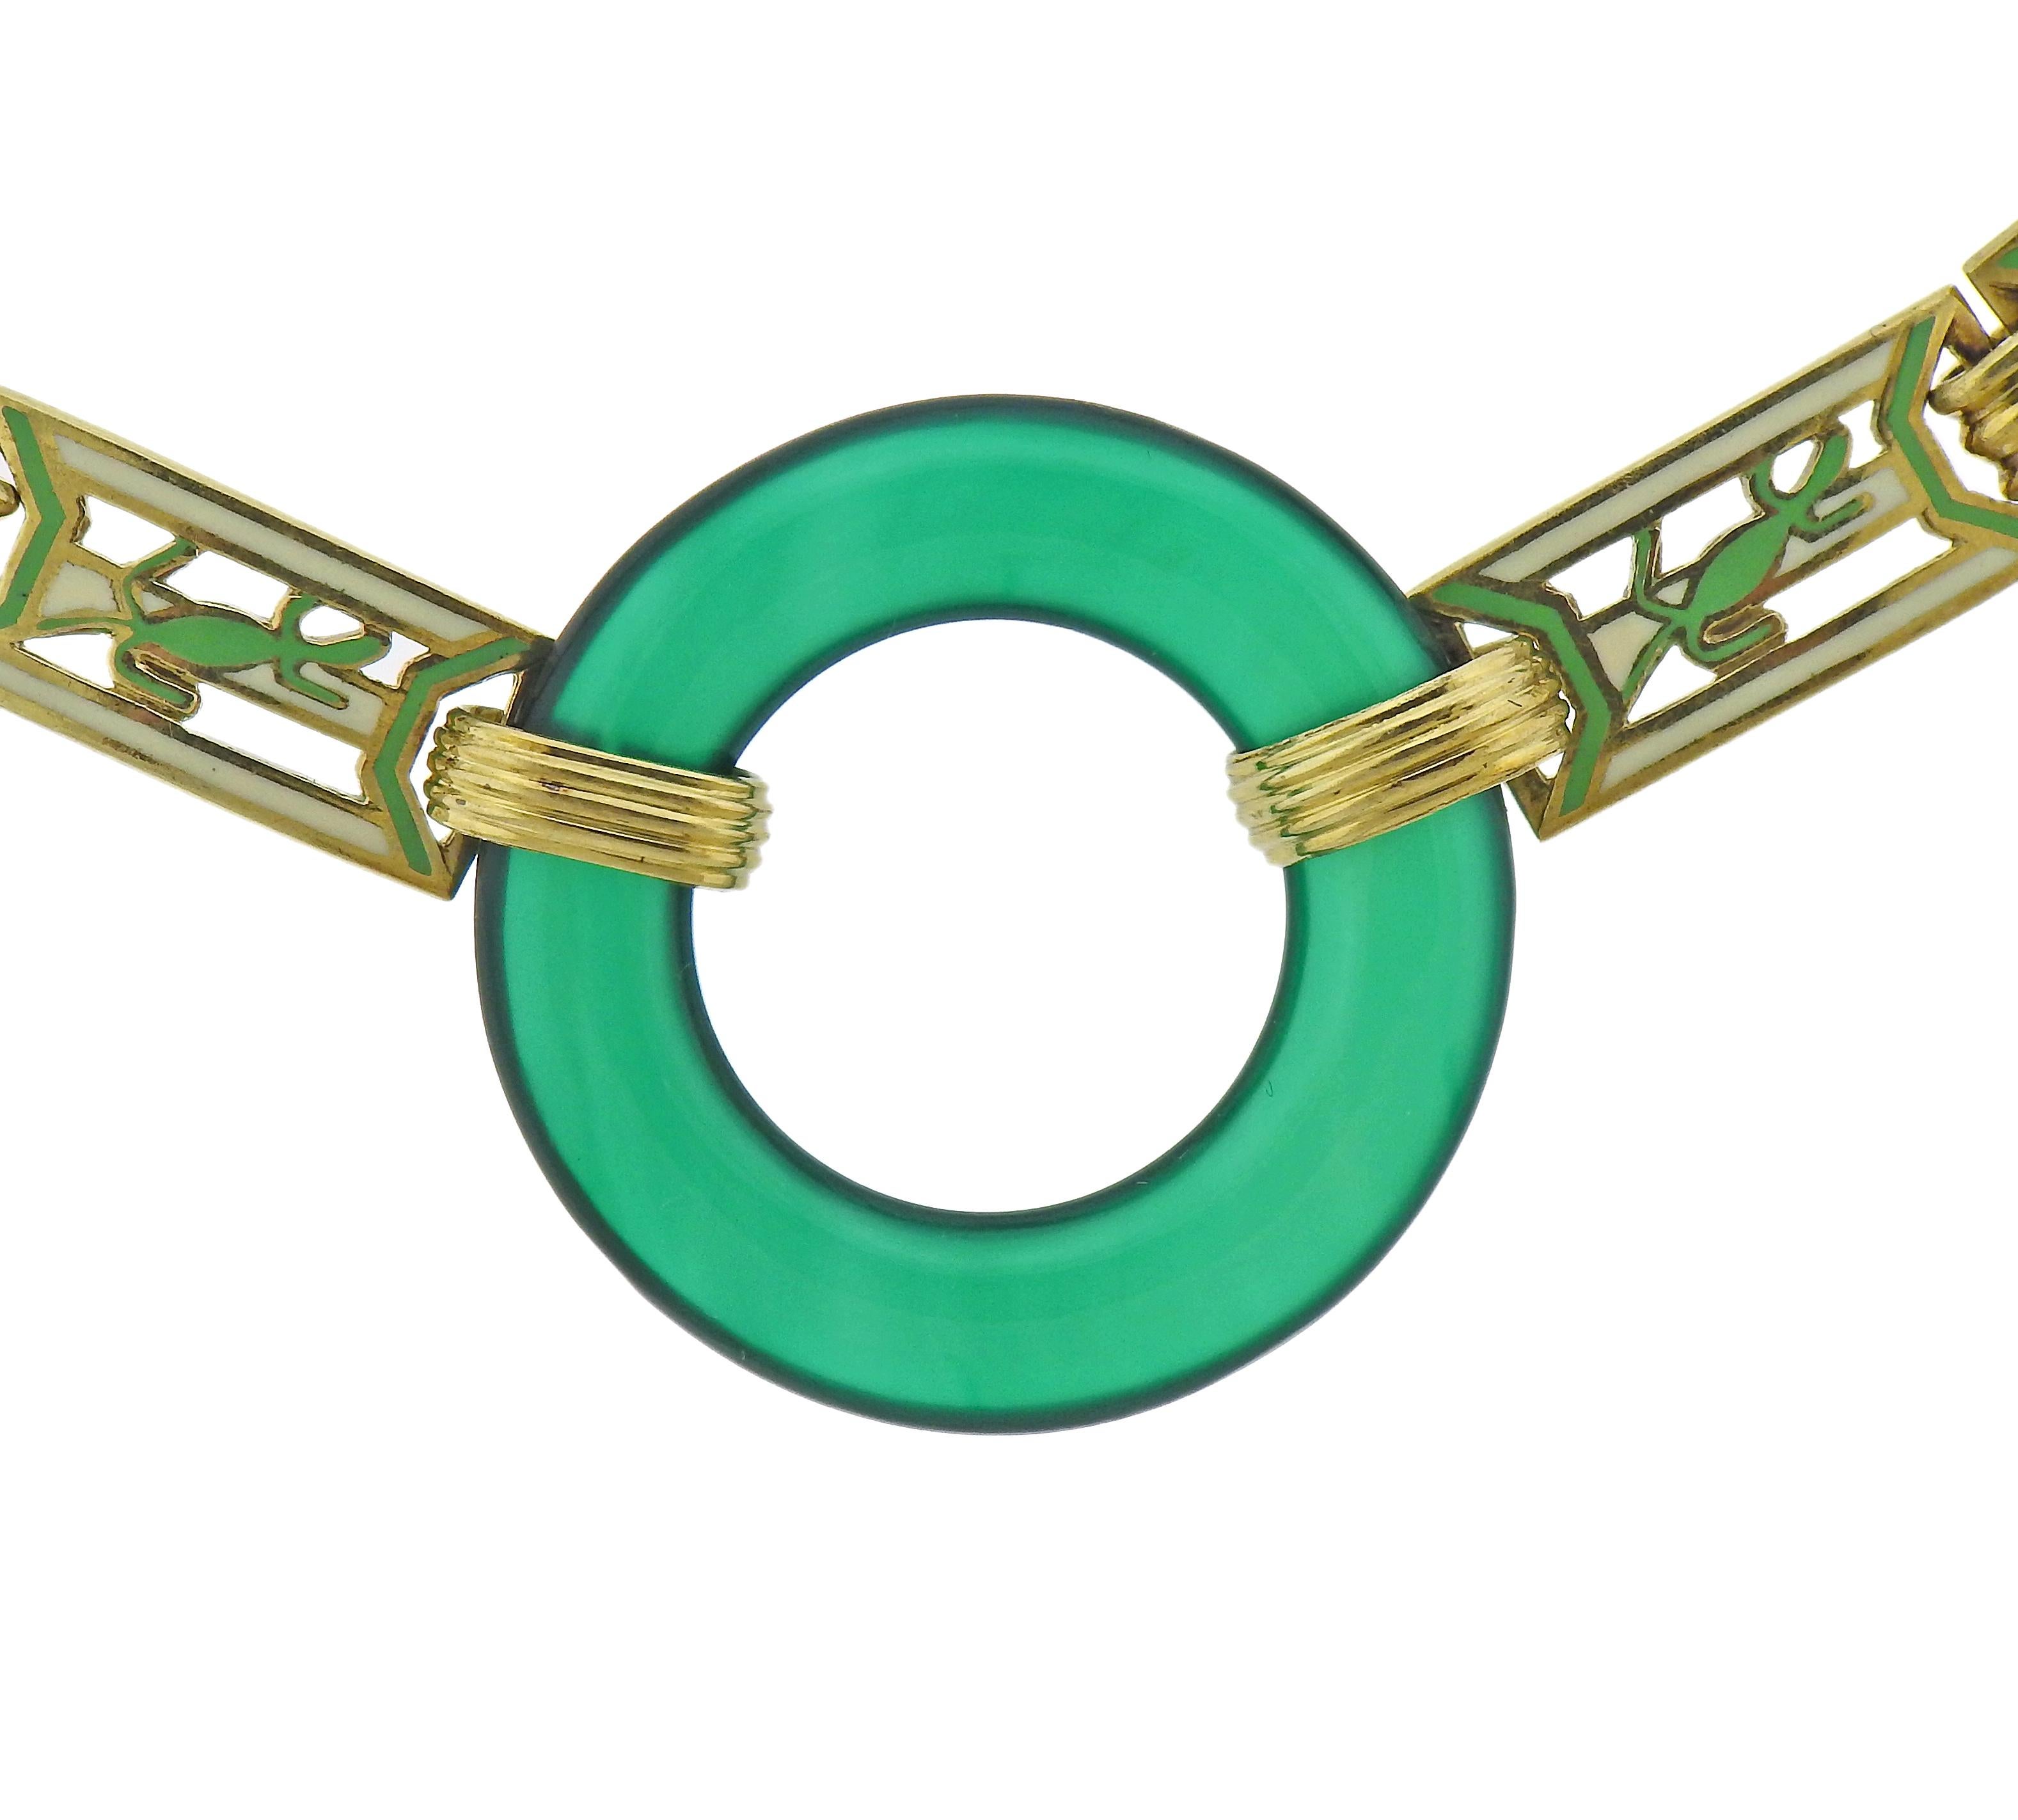 Art Deco 14k gold link necklace with chrysoprase and enamel. Necklace is 14